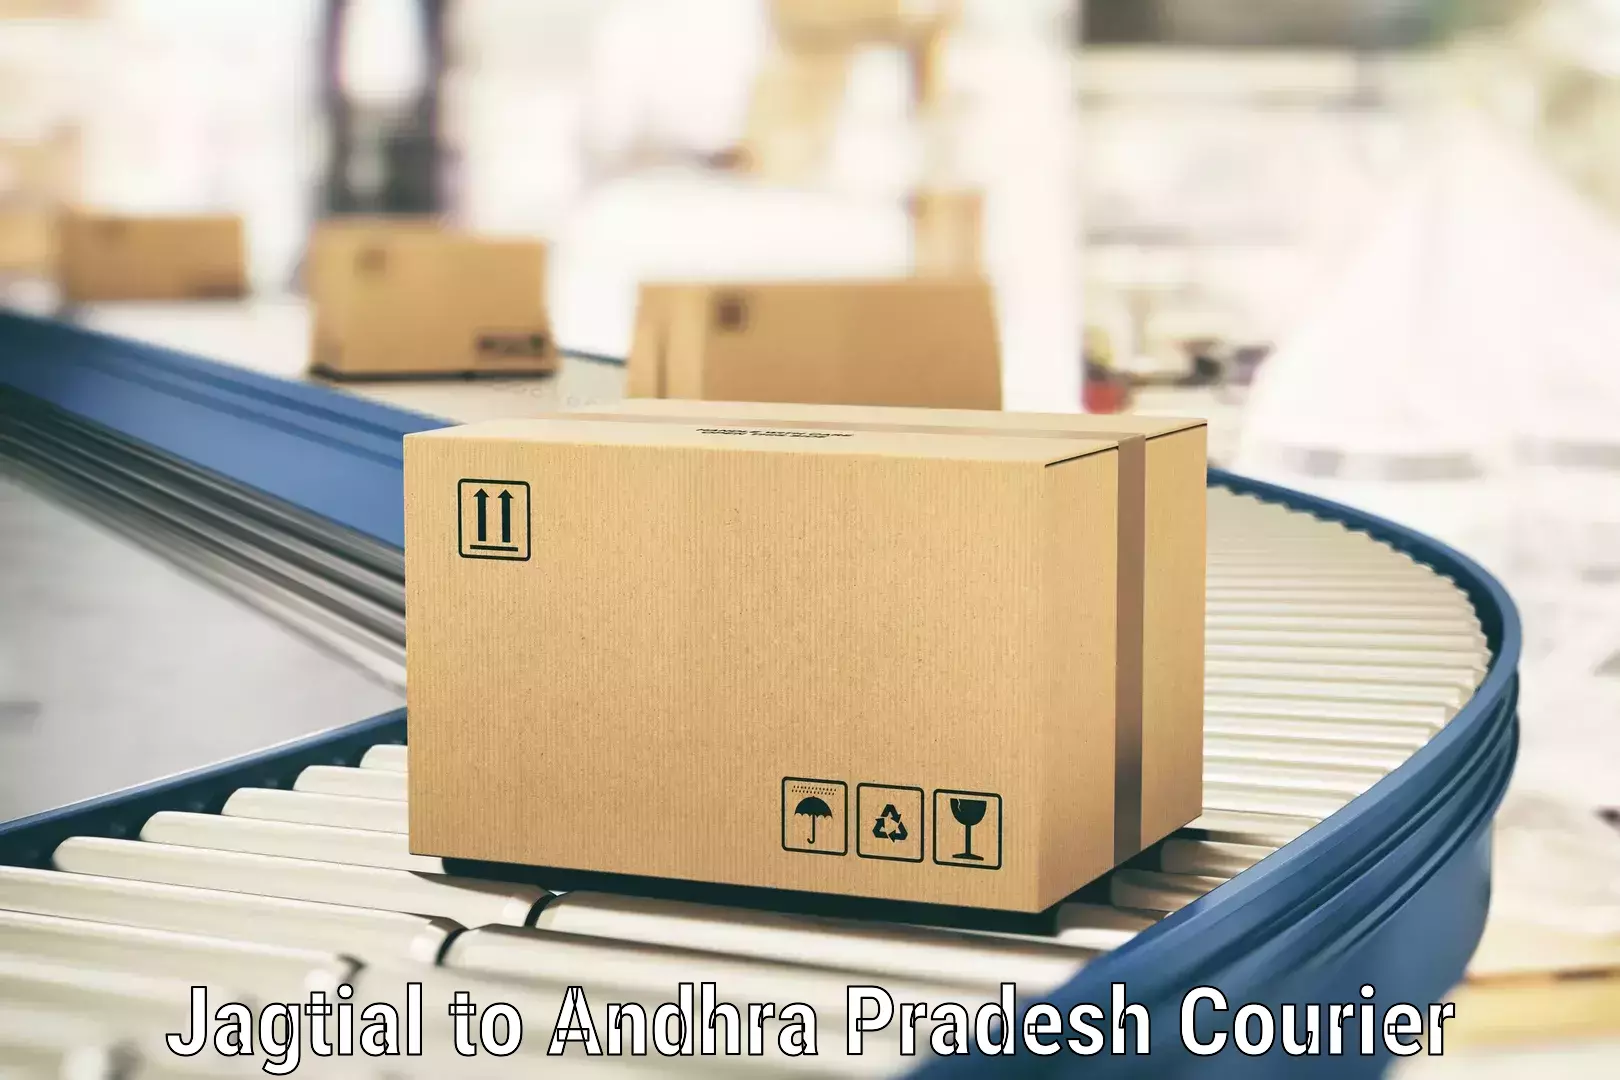 On-demand shipping options Jagtial to Machilipatnam